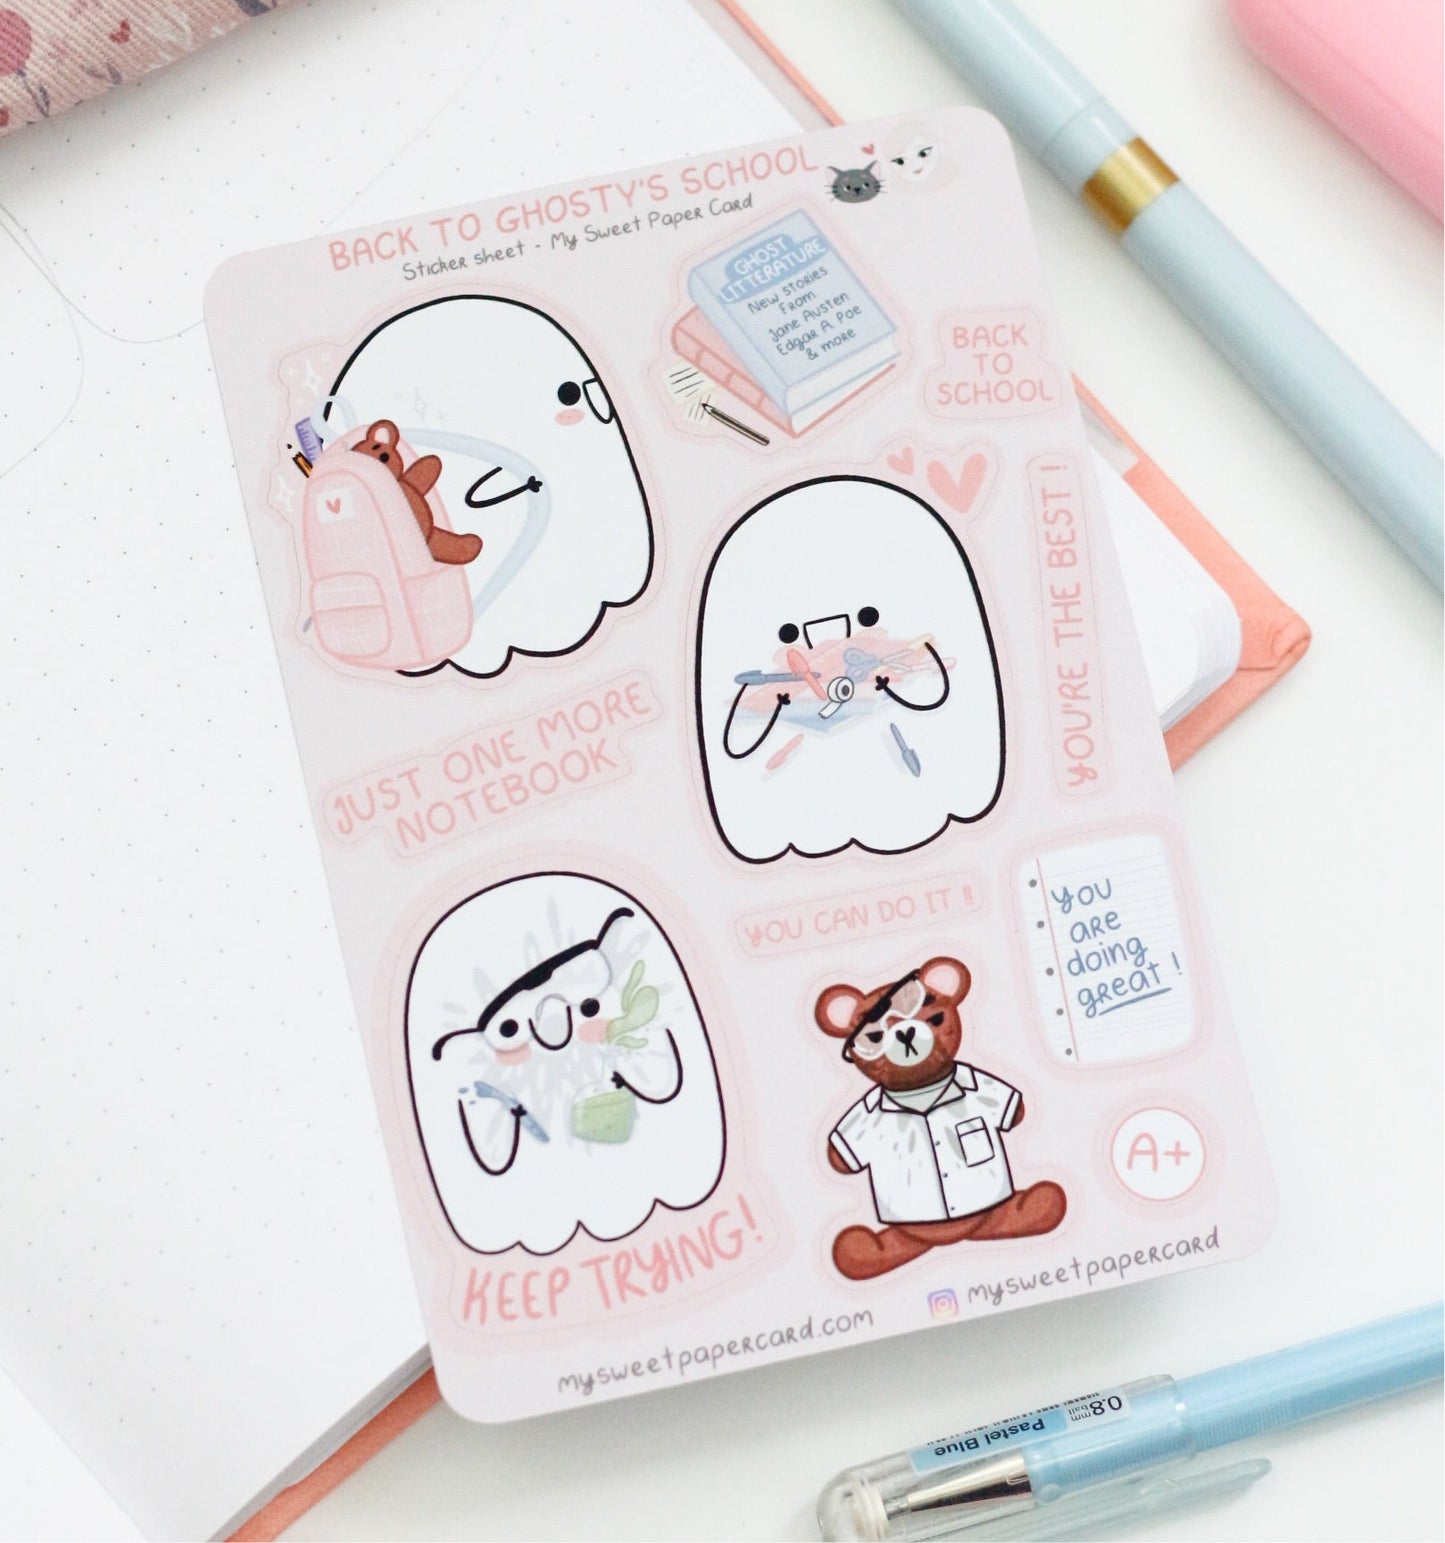 2ND SALE - Ghosty back to school stickers - Cute planner stickers - Ghost stickers